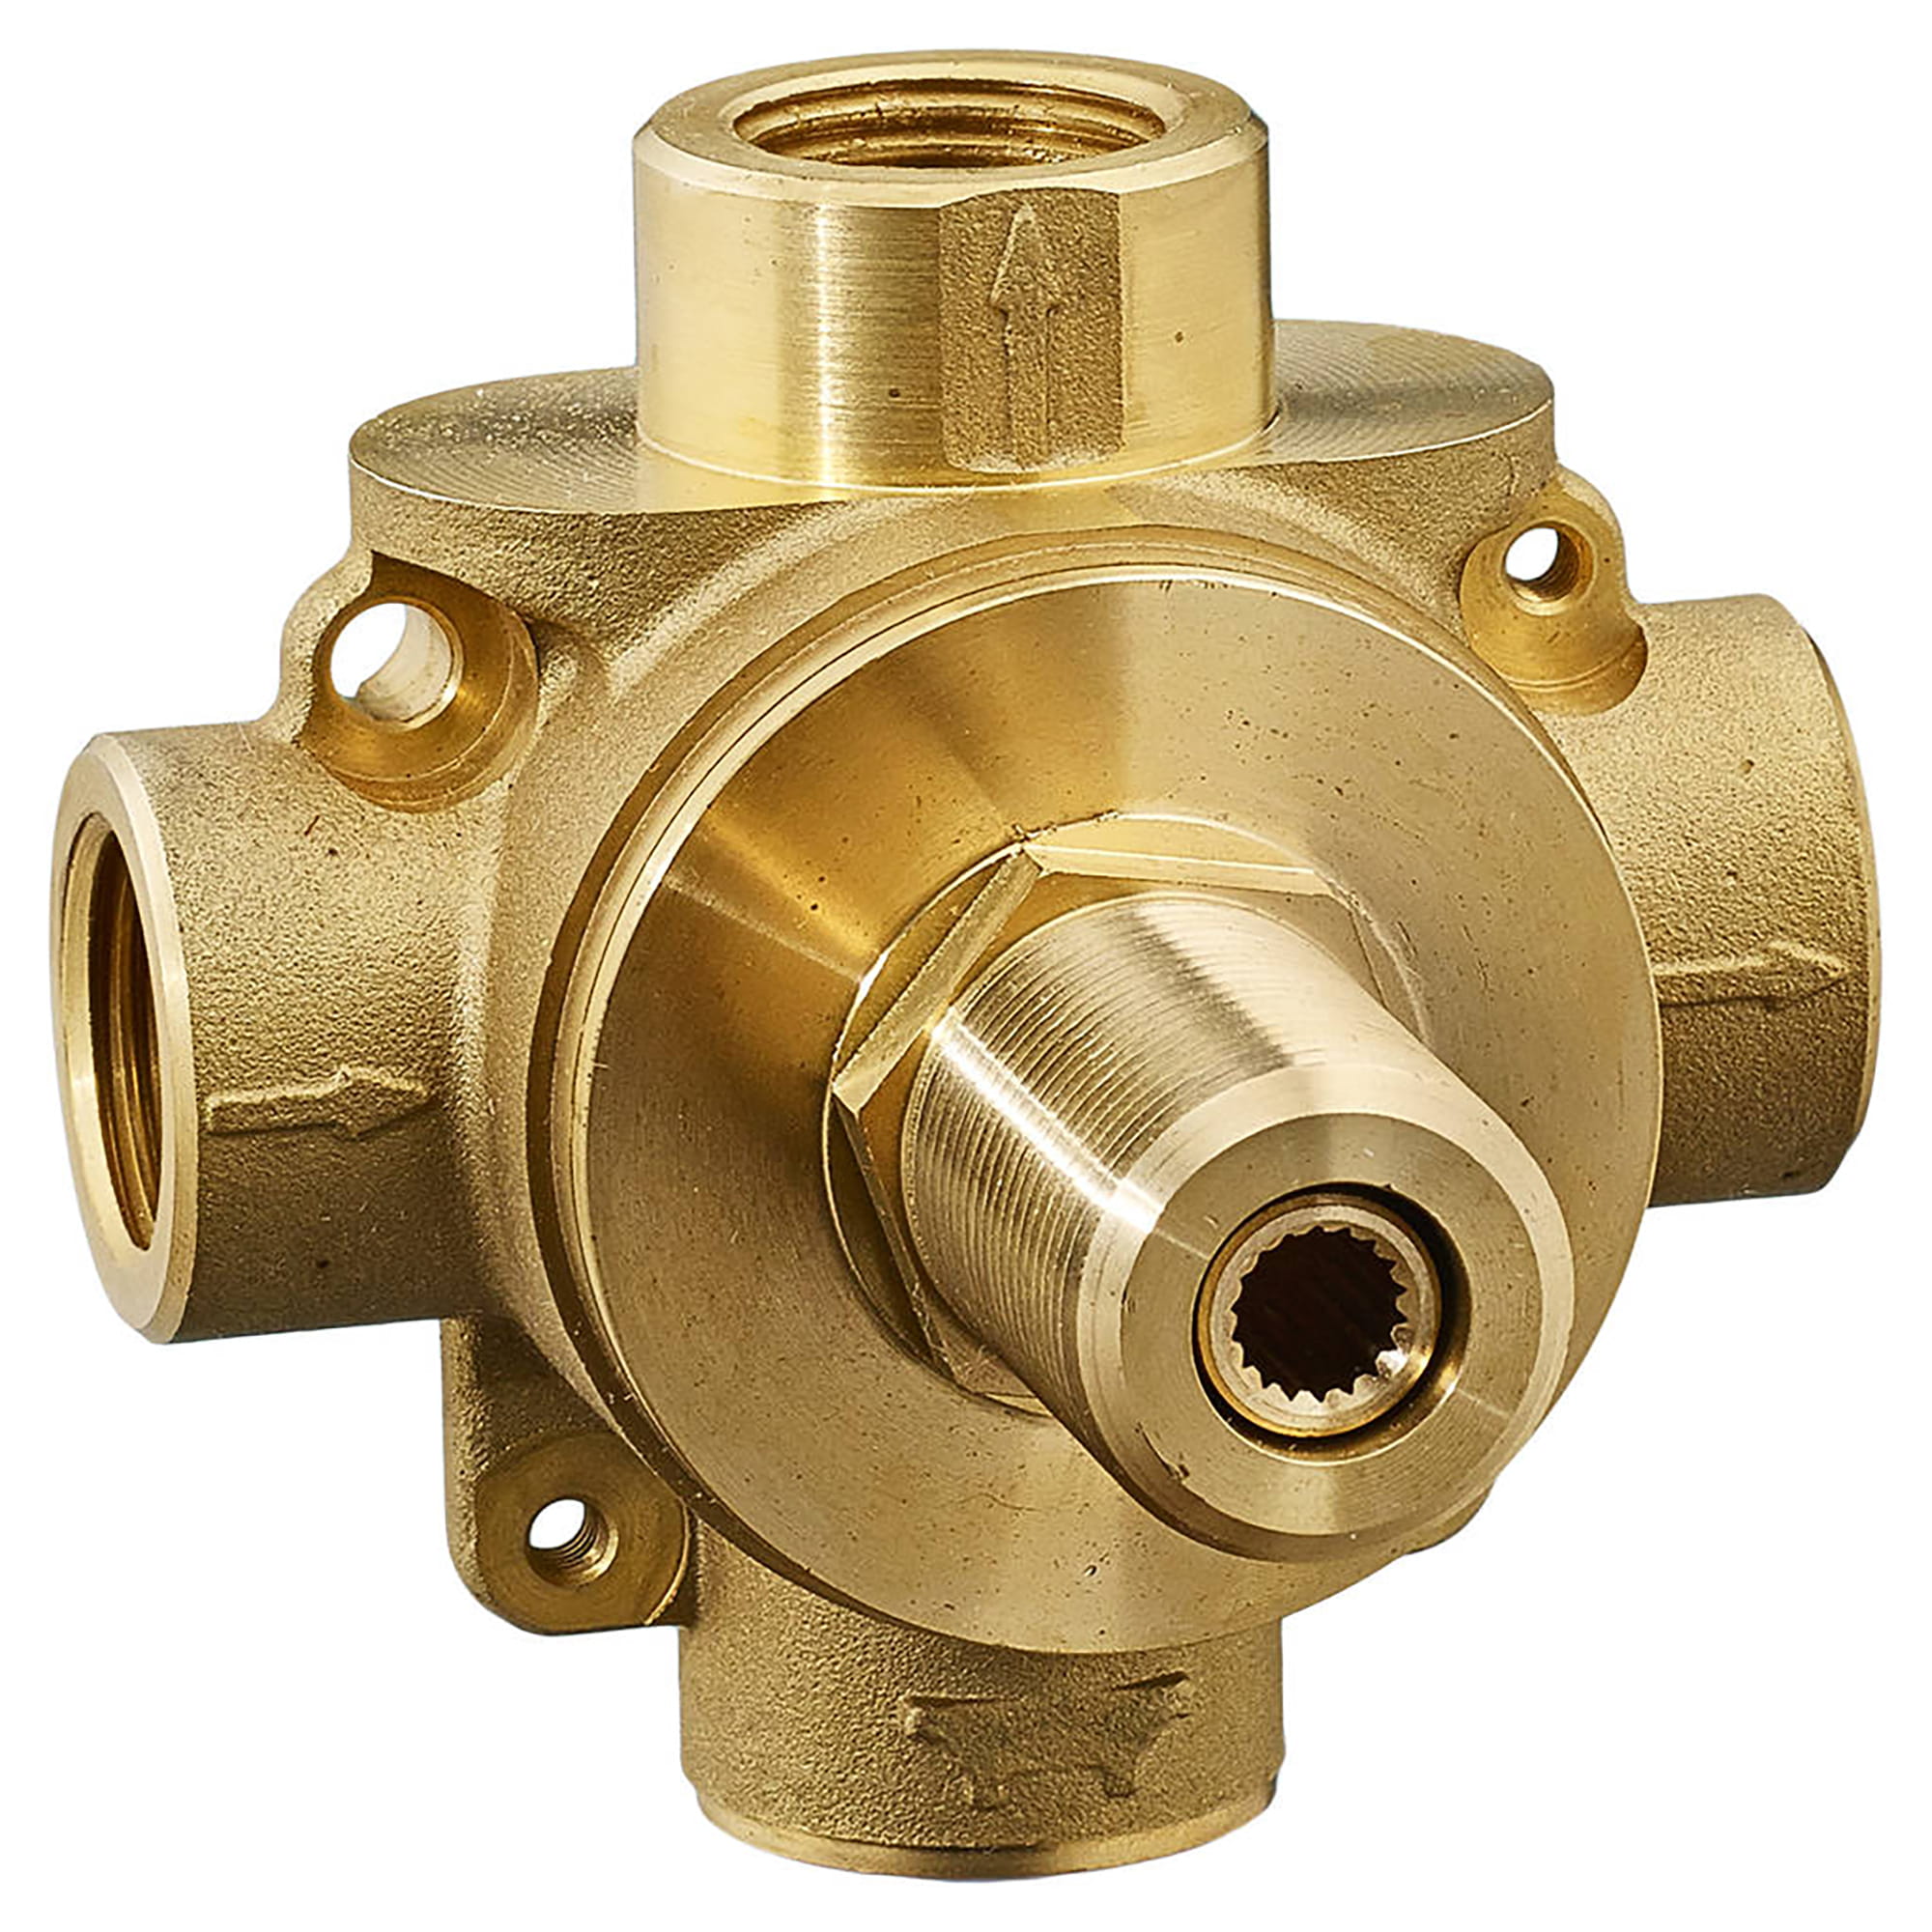 3-Way In-Wall Diverter Rough-In Valve With 3 Discrete Functions